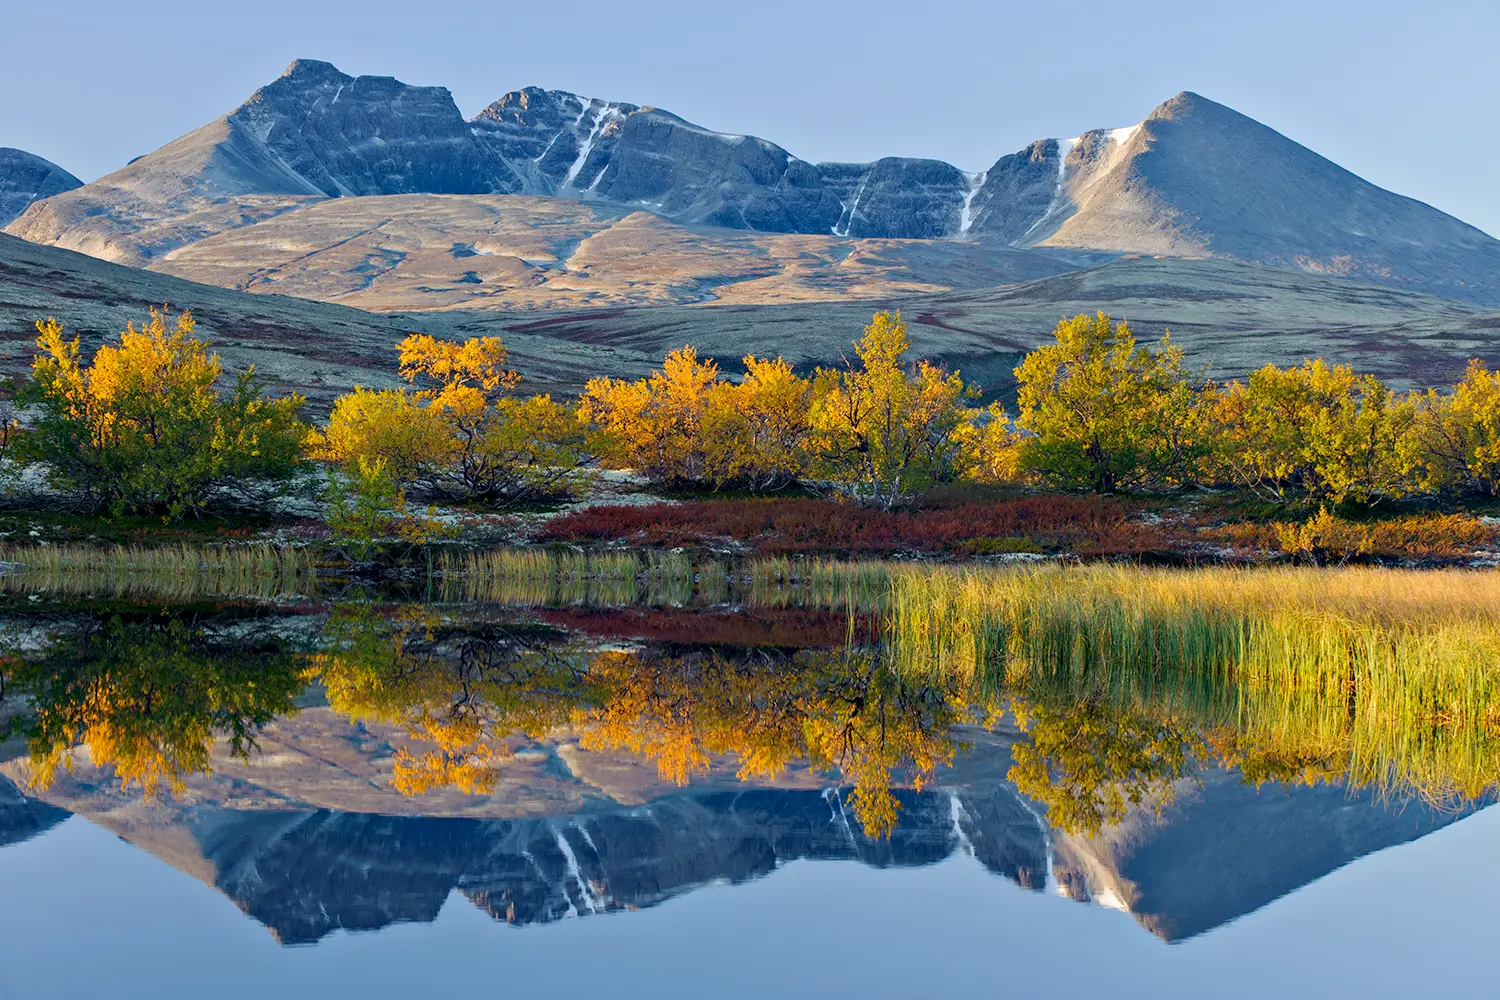 Reflection of Rondslottet mountain in a small lake. Rondane National park, Norway